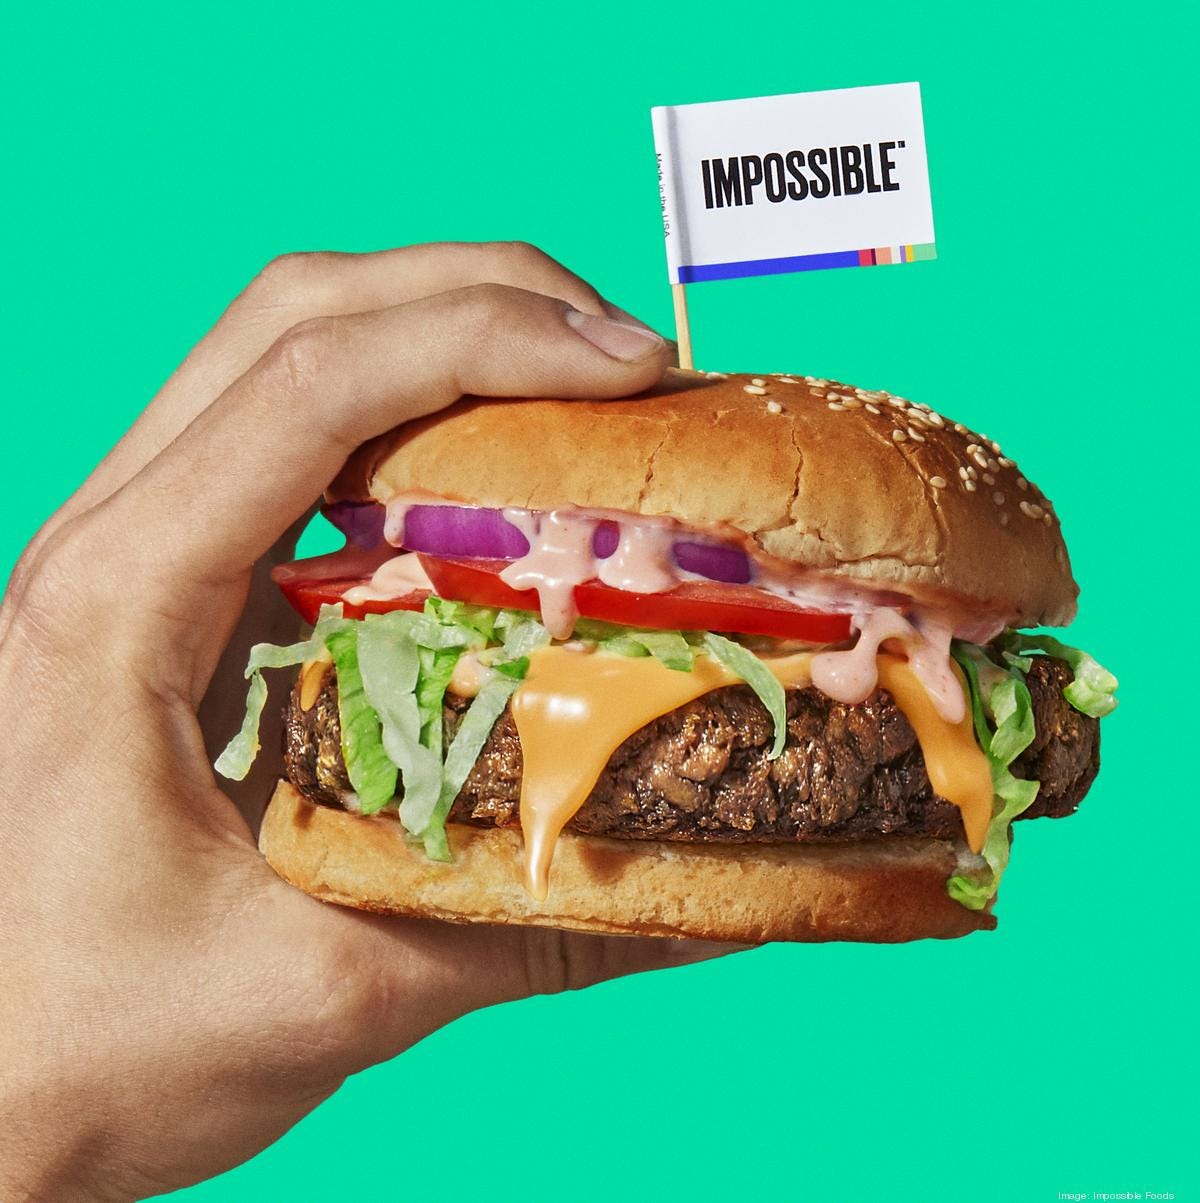 Bay Area Inno - Impossible Foods is embroiled in a patent 'beef' with an  alternative meat rival